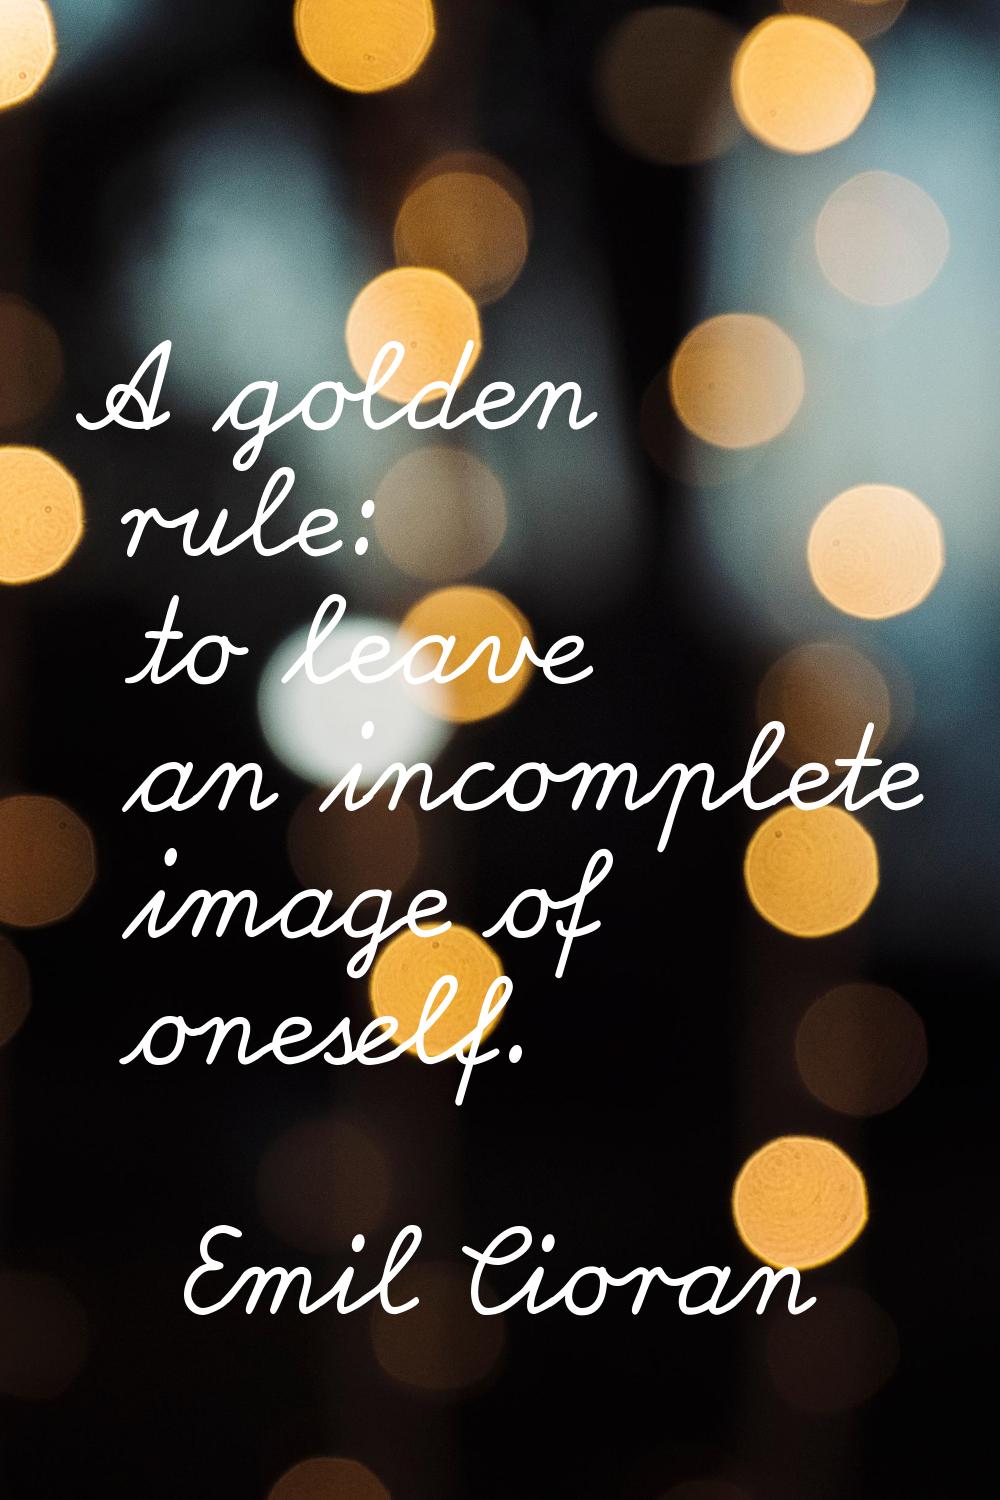 A golden rule: to leave an incomplete image of oneself.